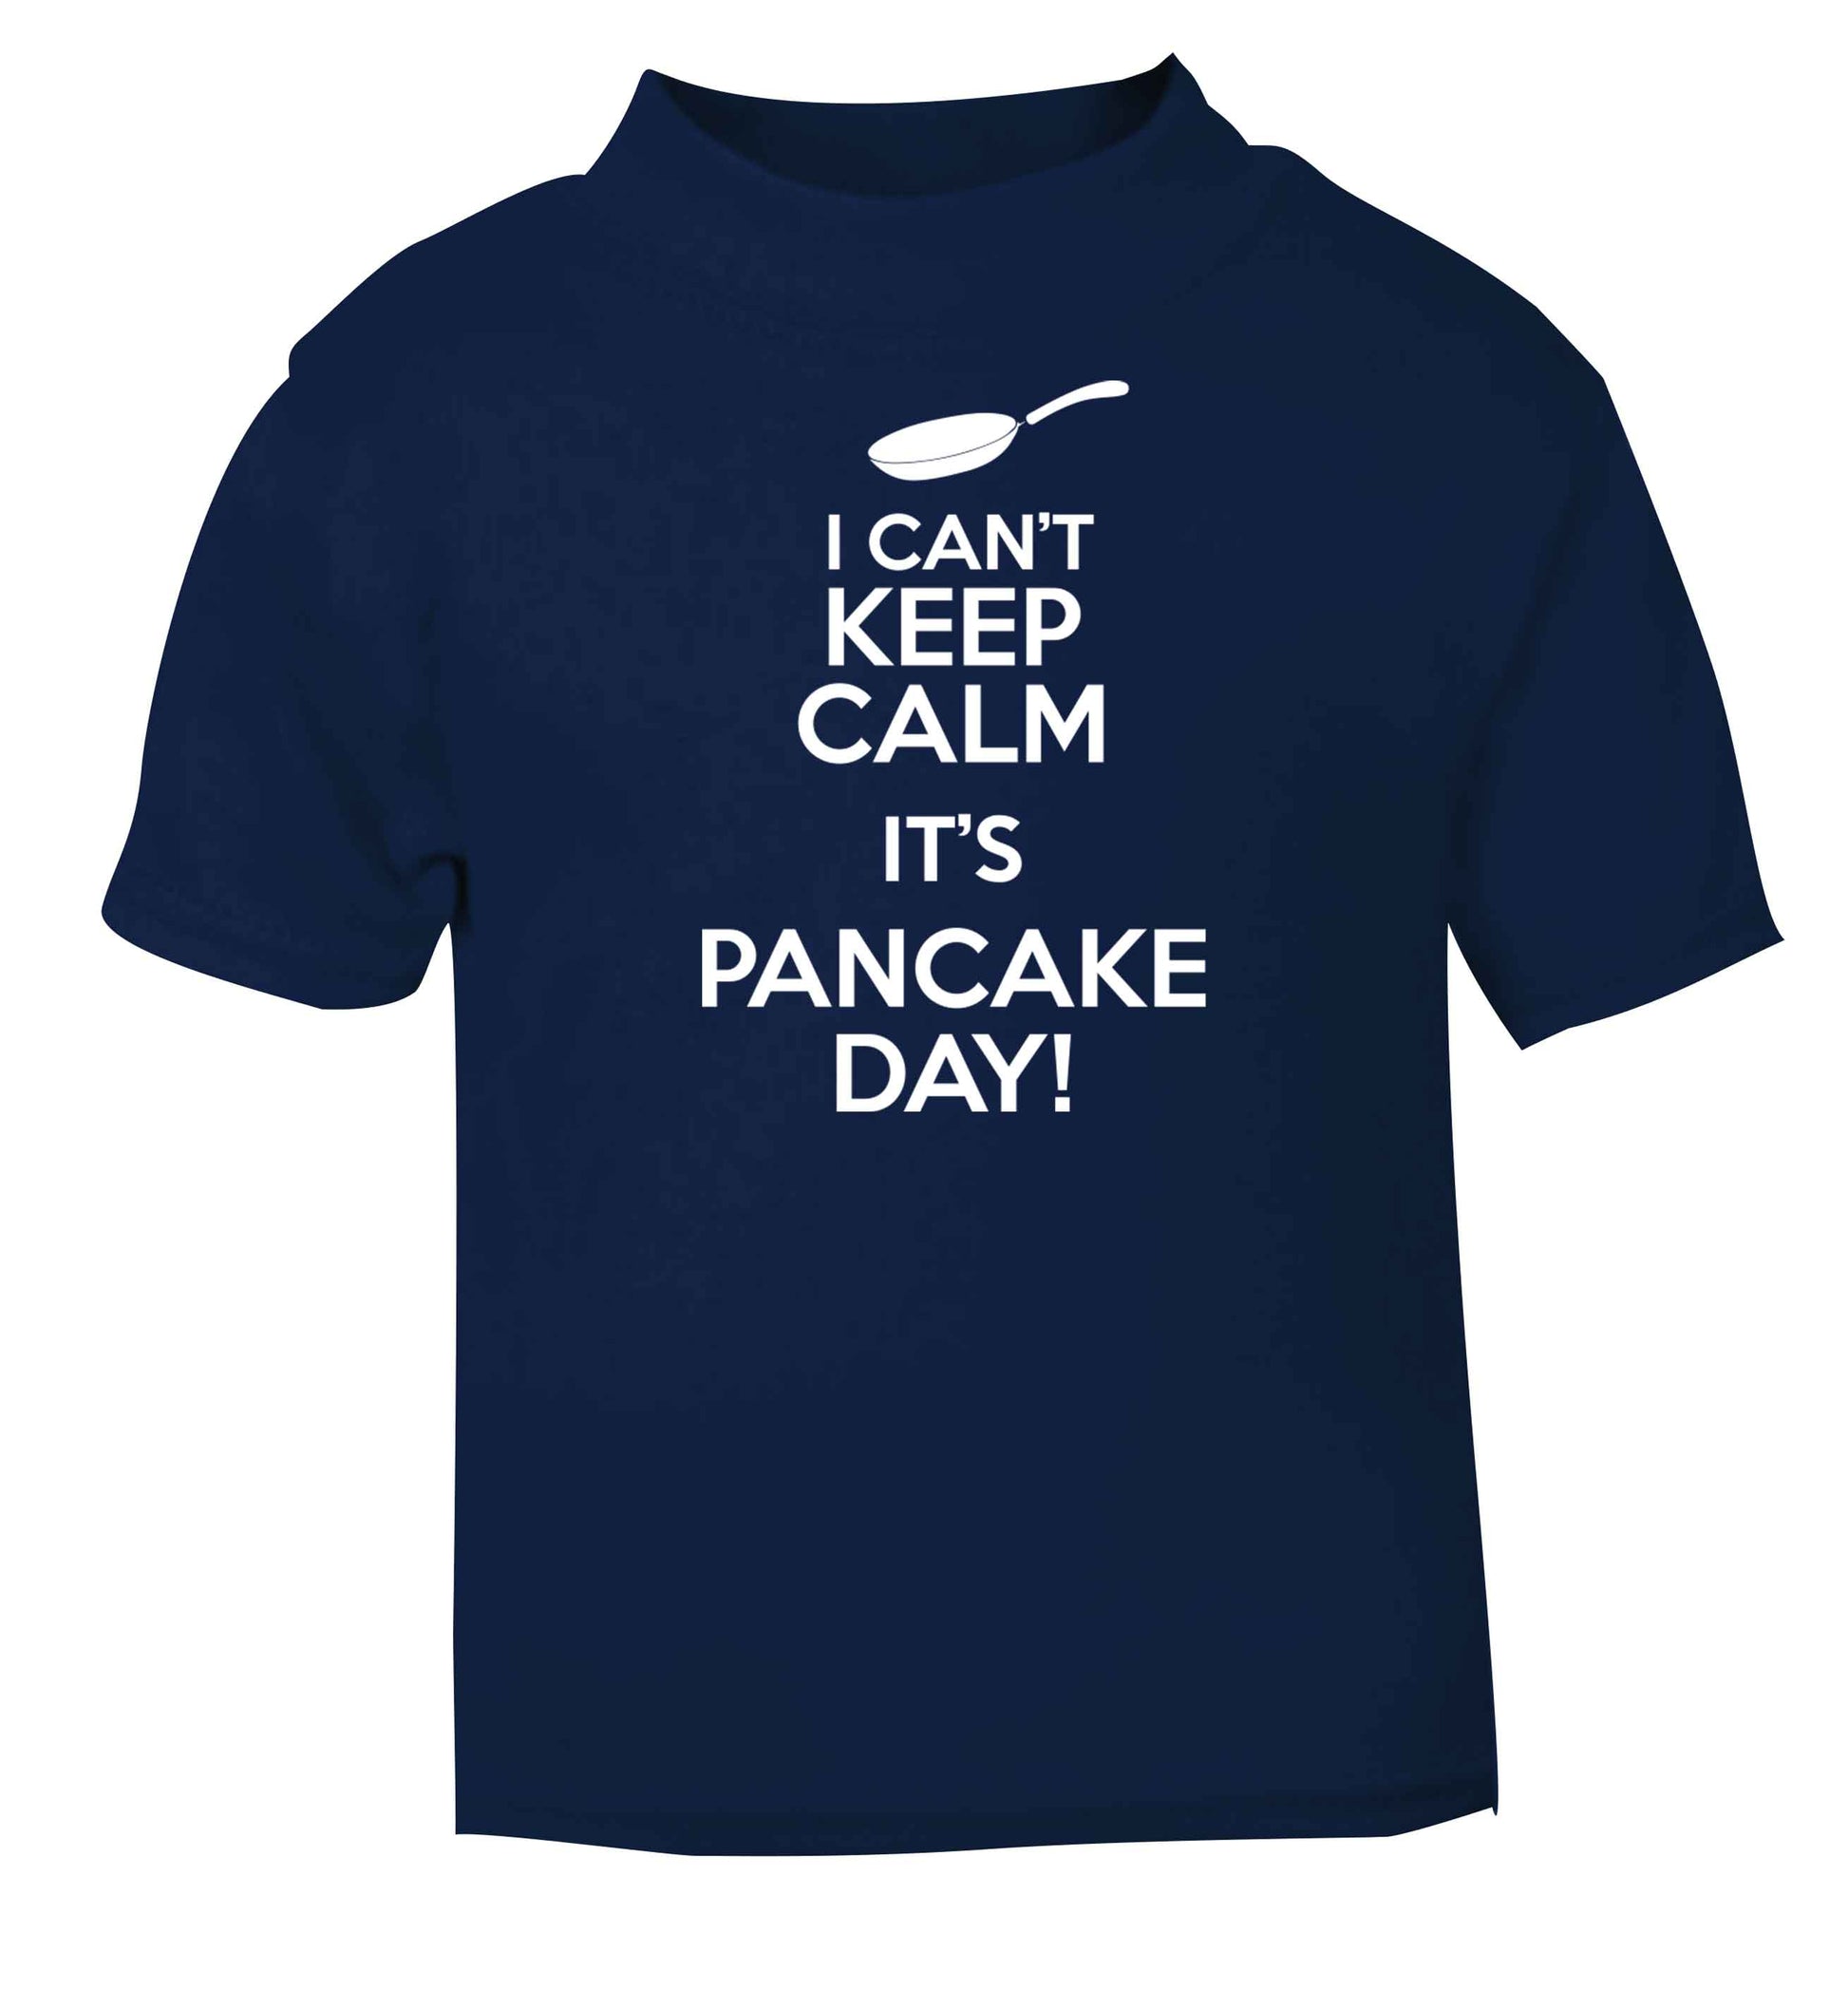 I can't keep calm it's pancake day! navy baby toddler Tshirt 2 Years